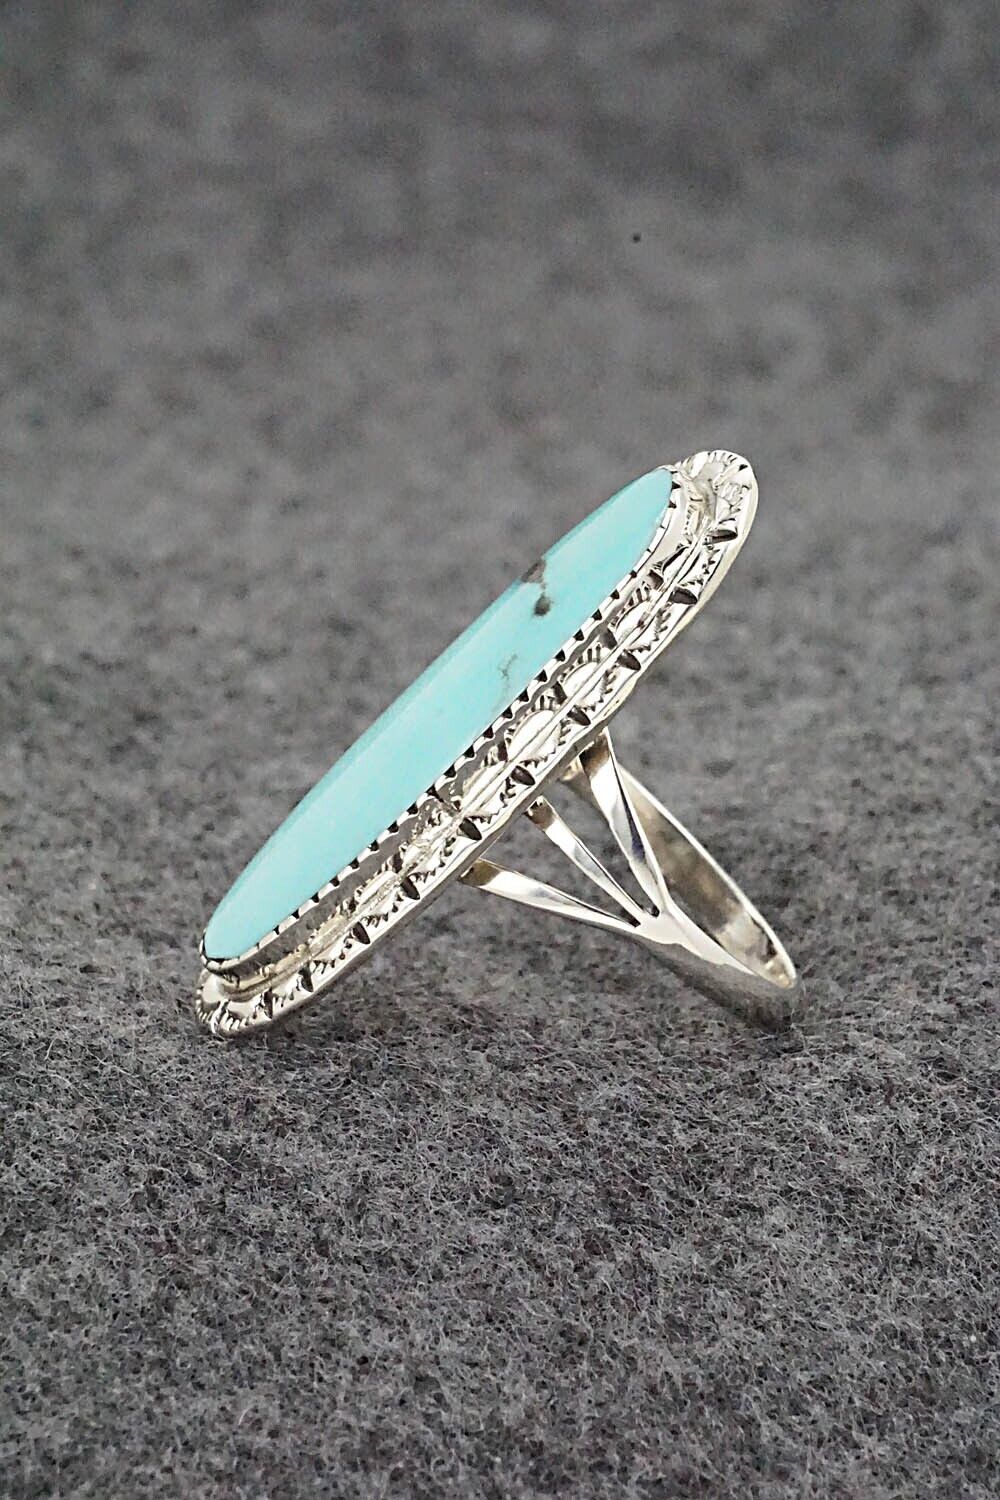 Turquoise & Sterling Silver Ring - Mike Smith - Size 9